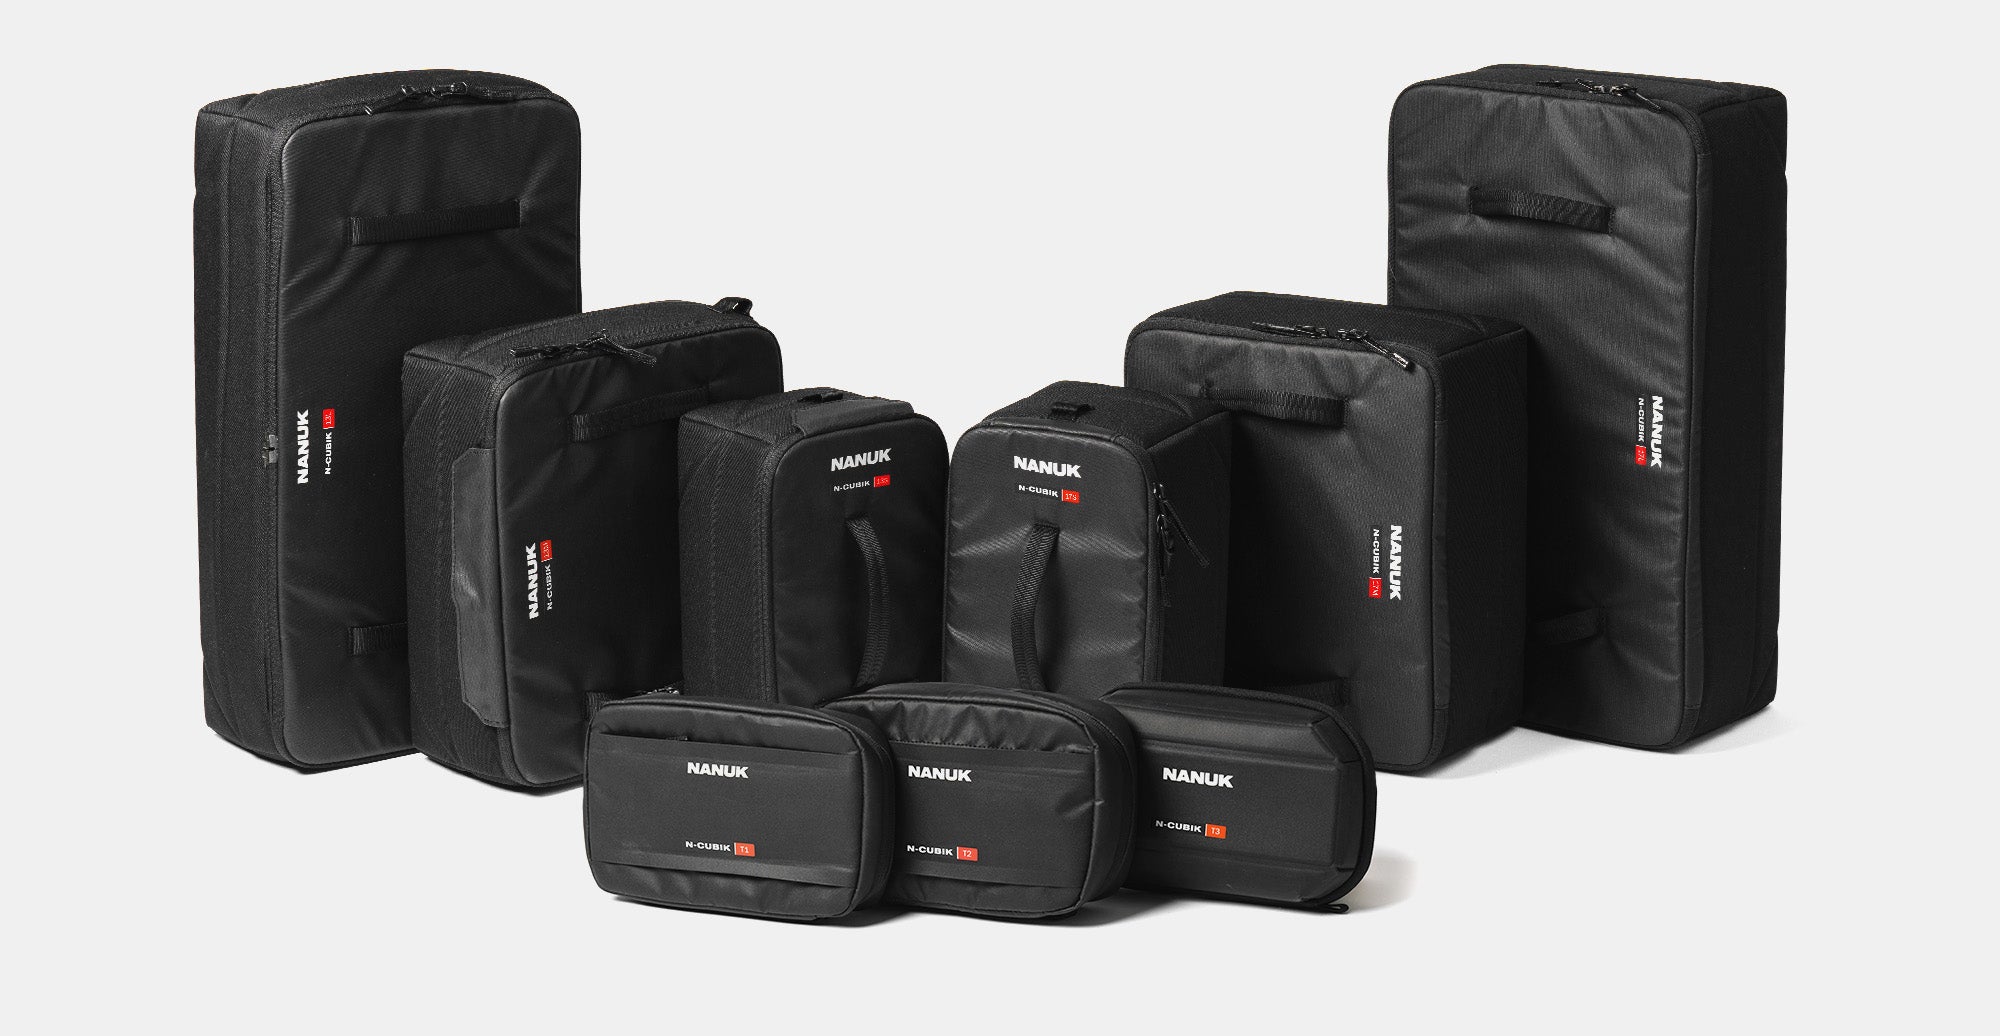 At the core of Nanuk’s unique Ecosystem, the N-CUBIK, internal organizers and tech pouches seamlessly integrate with Nanuk’s hard cases and backpacks.